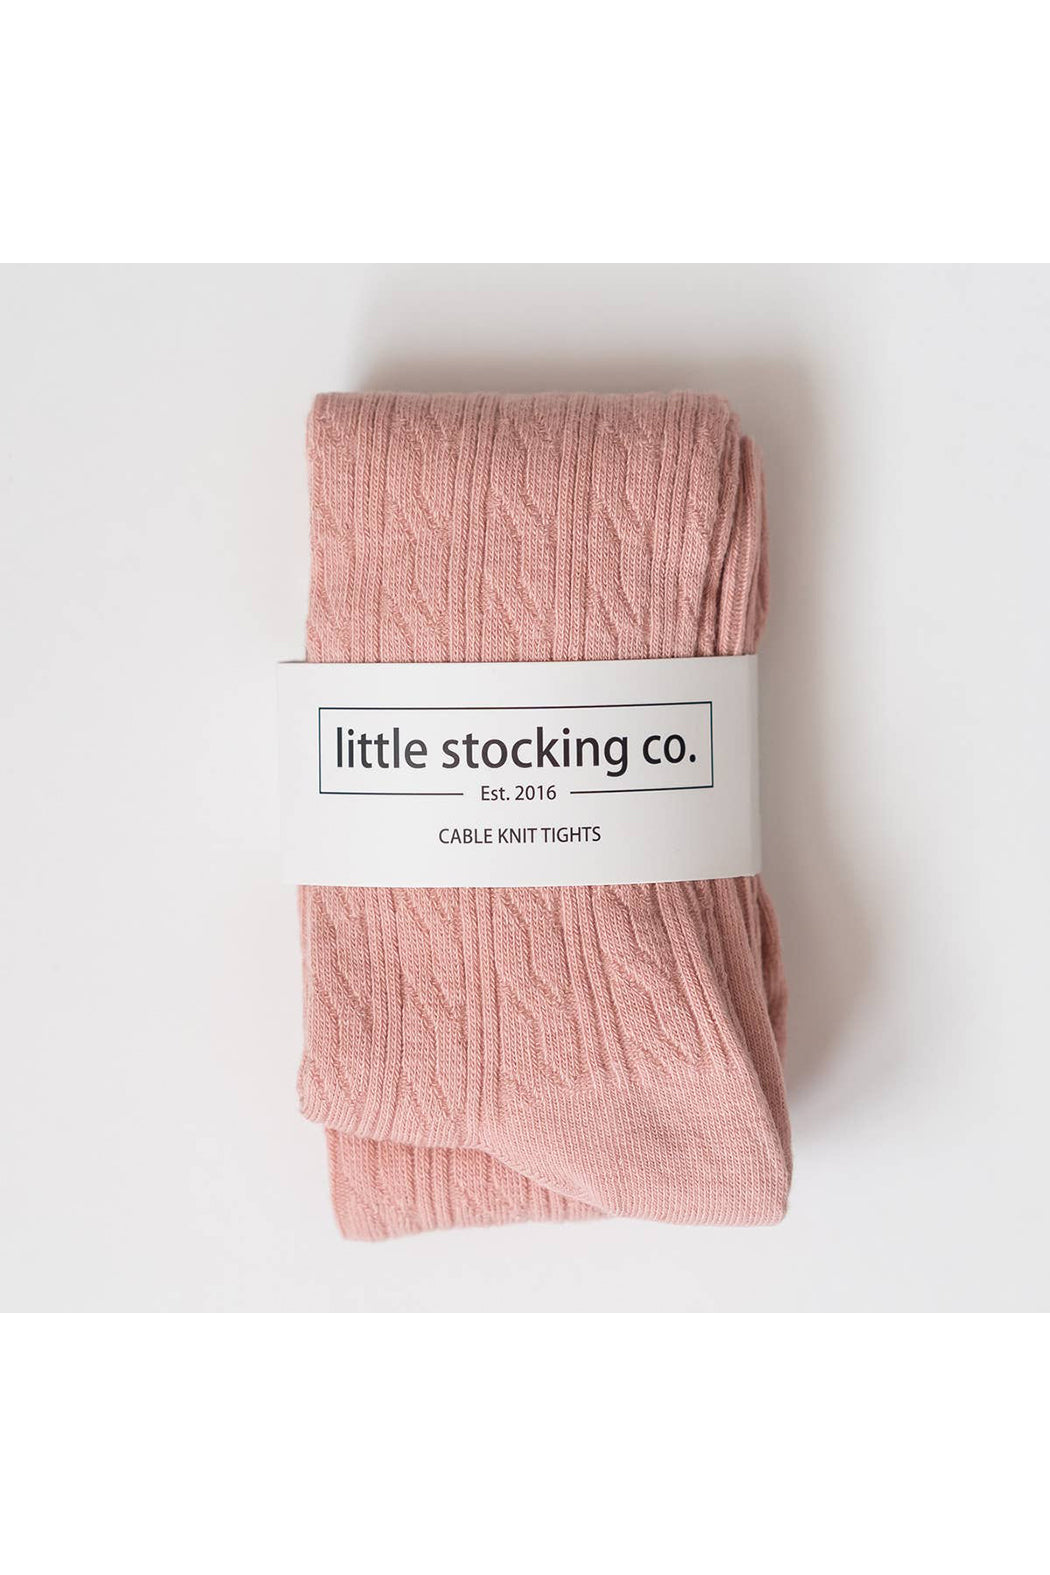 Little Stocking Co Blush Cable Knit Tights